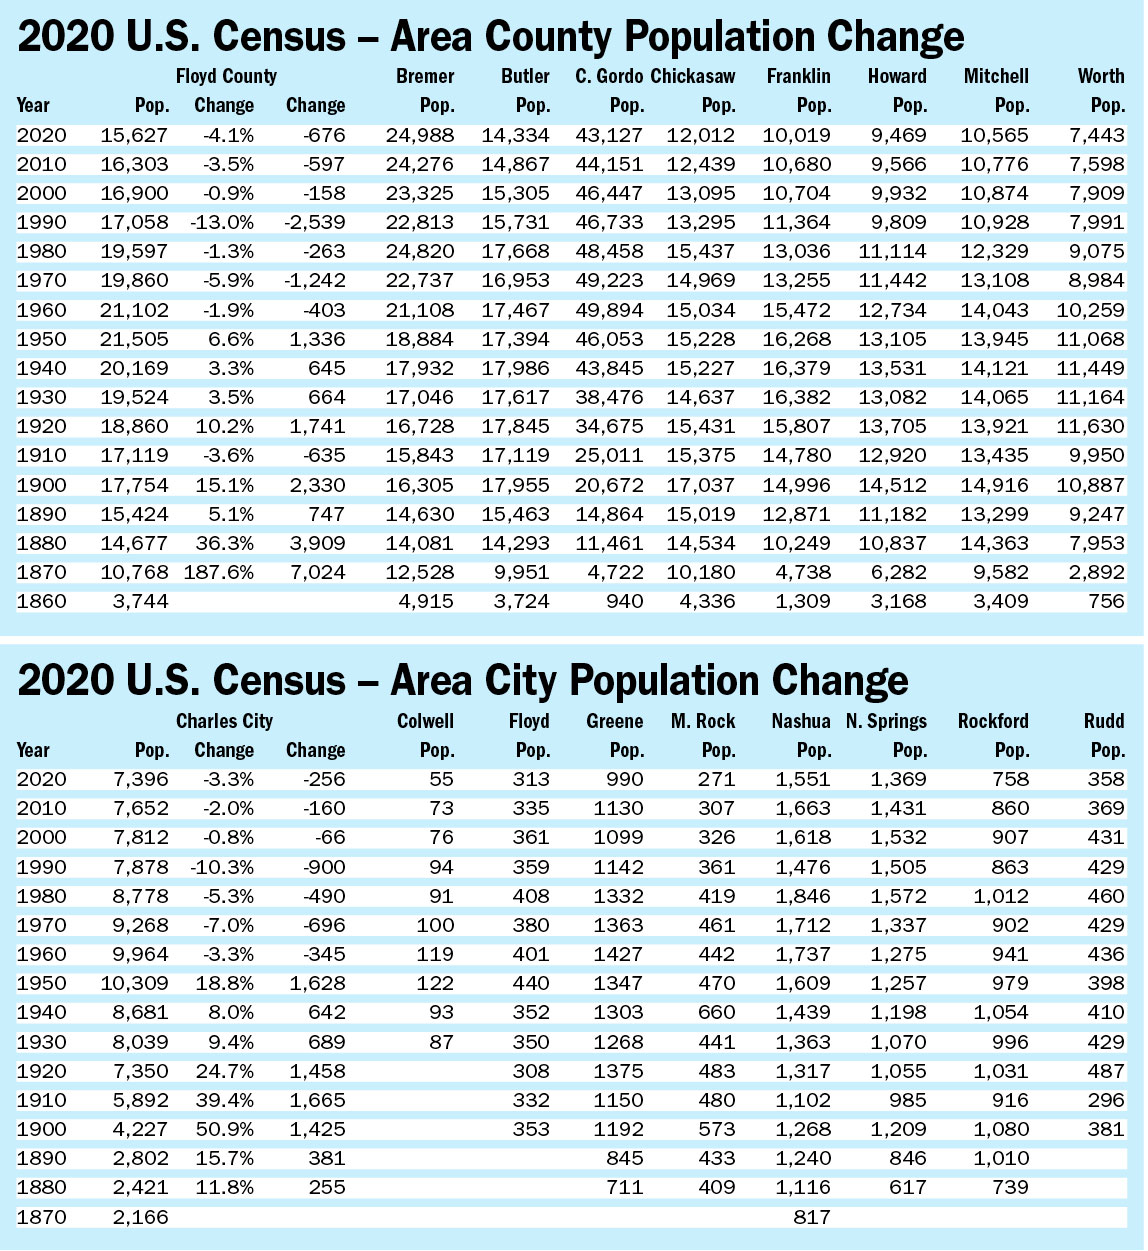 Floyd County cities, as well as Floyd County and most surrounding counties show population declines